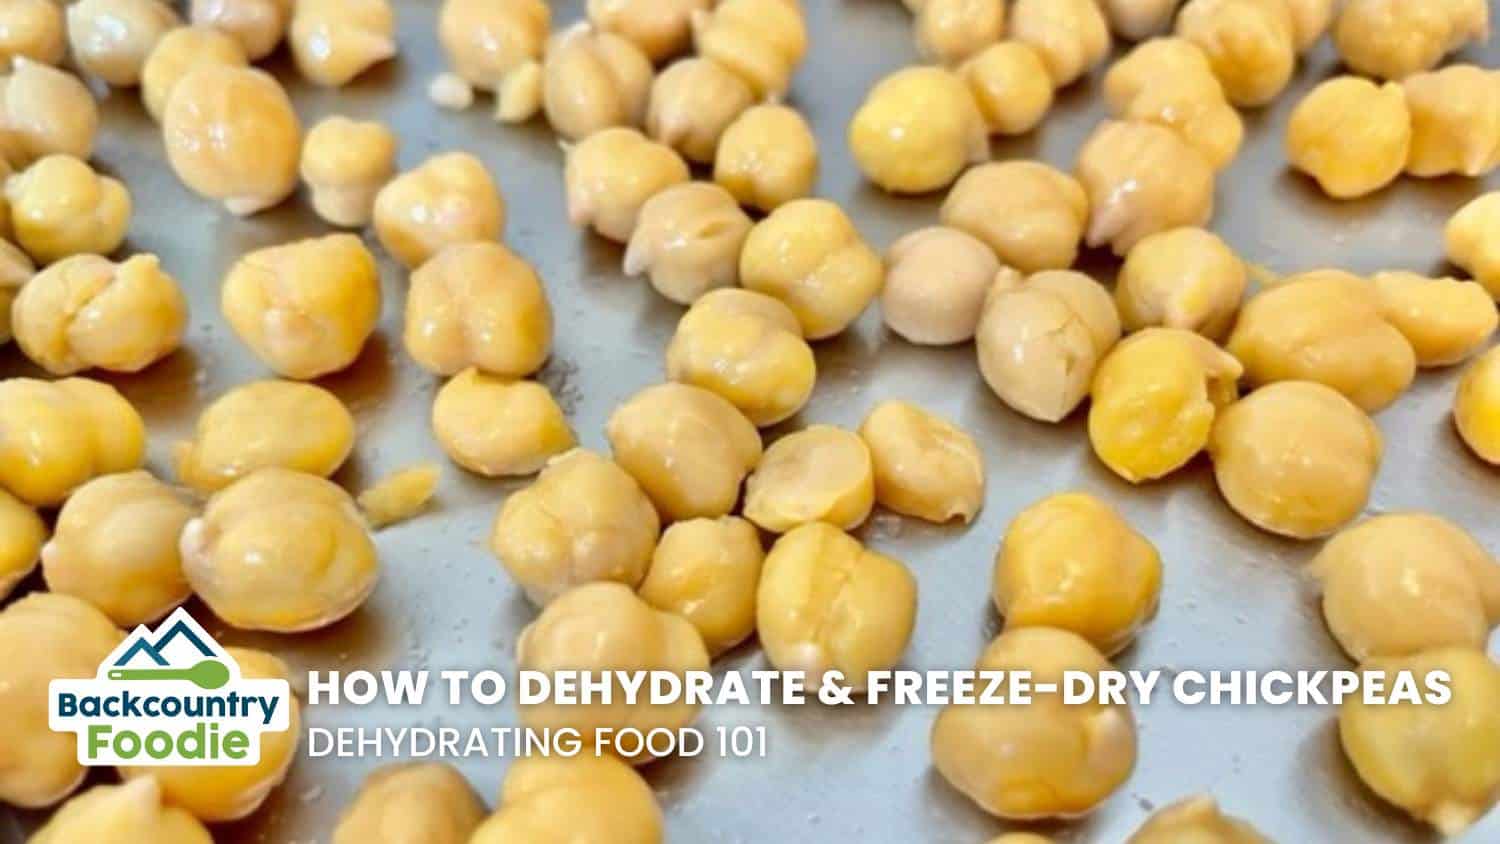 Backcountry Foodie How to Dehydrate Chickpeas blog thumbnail Image